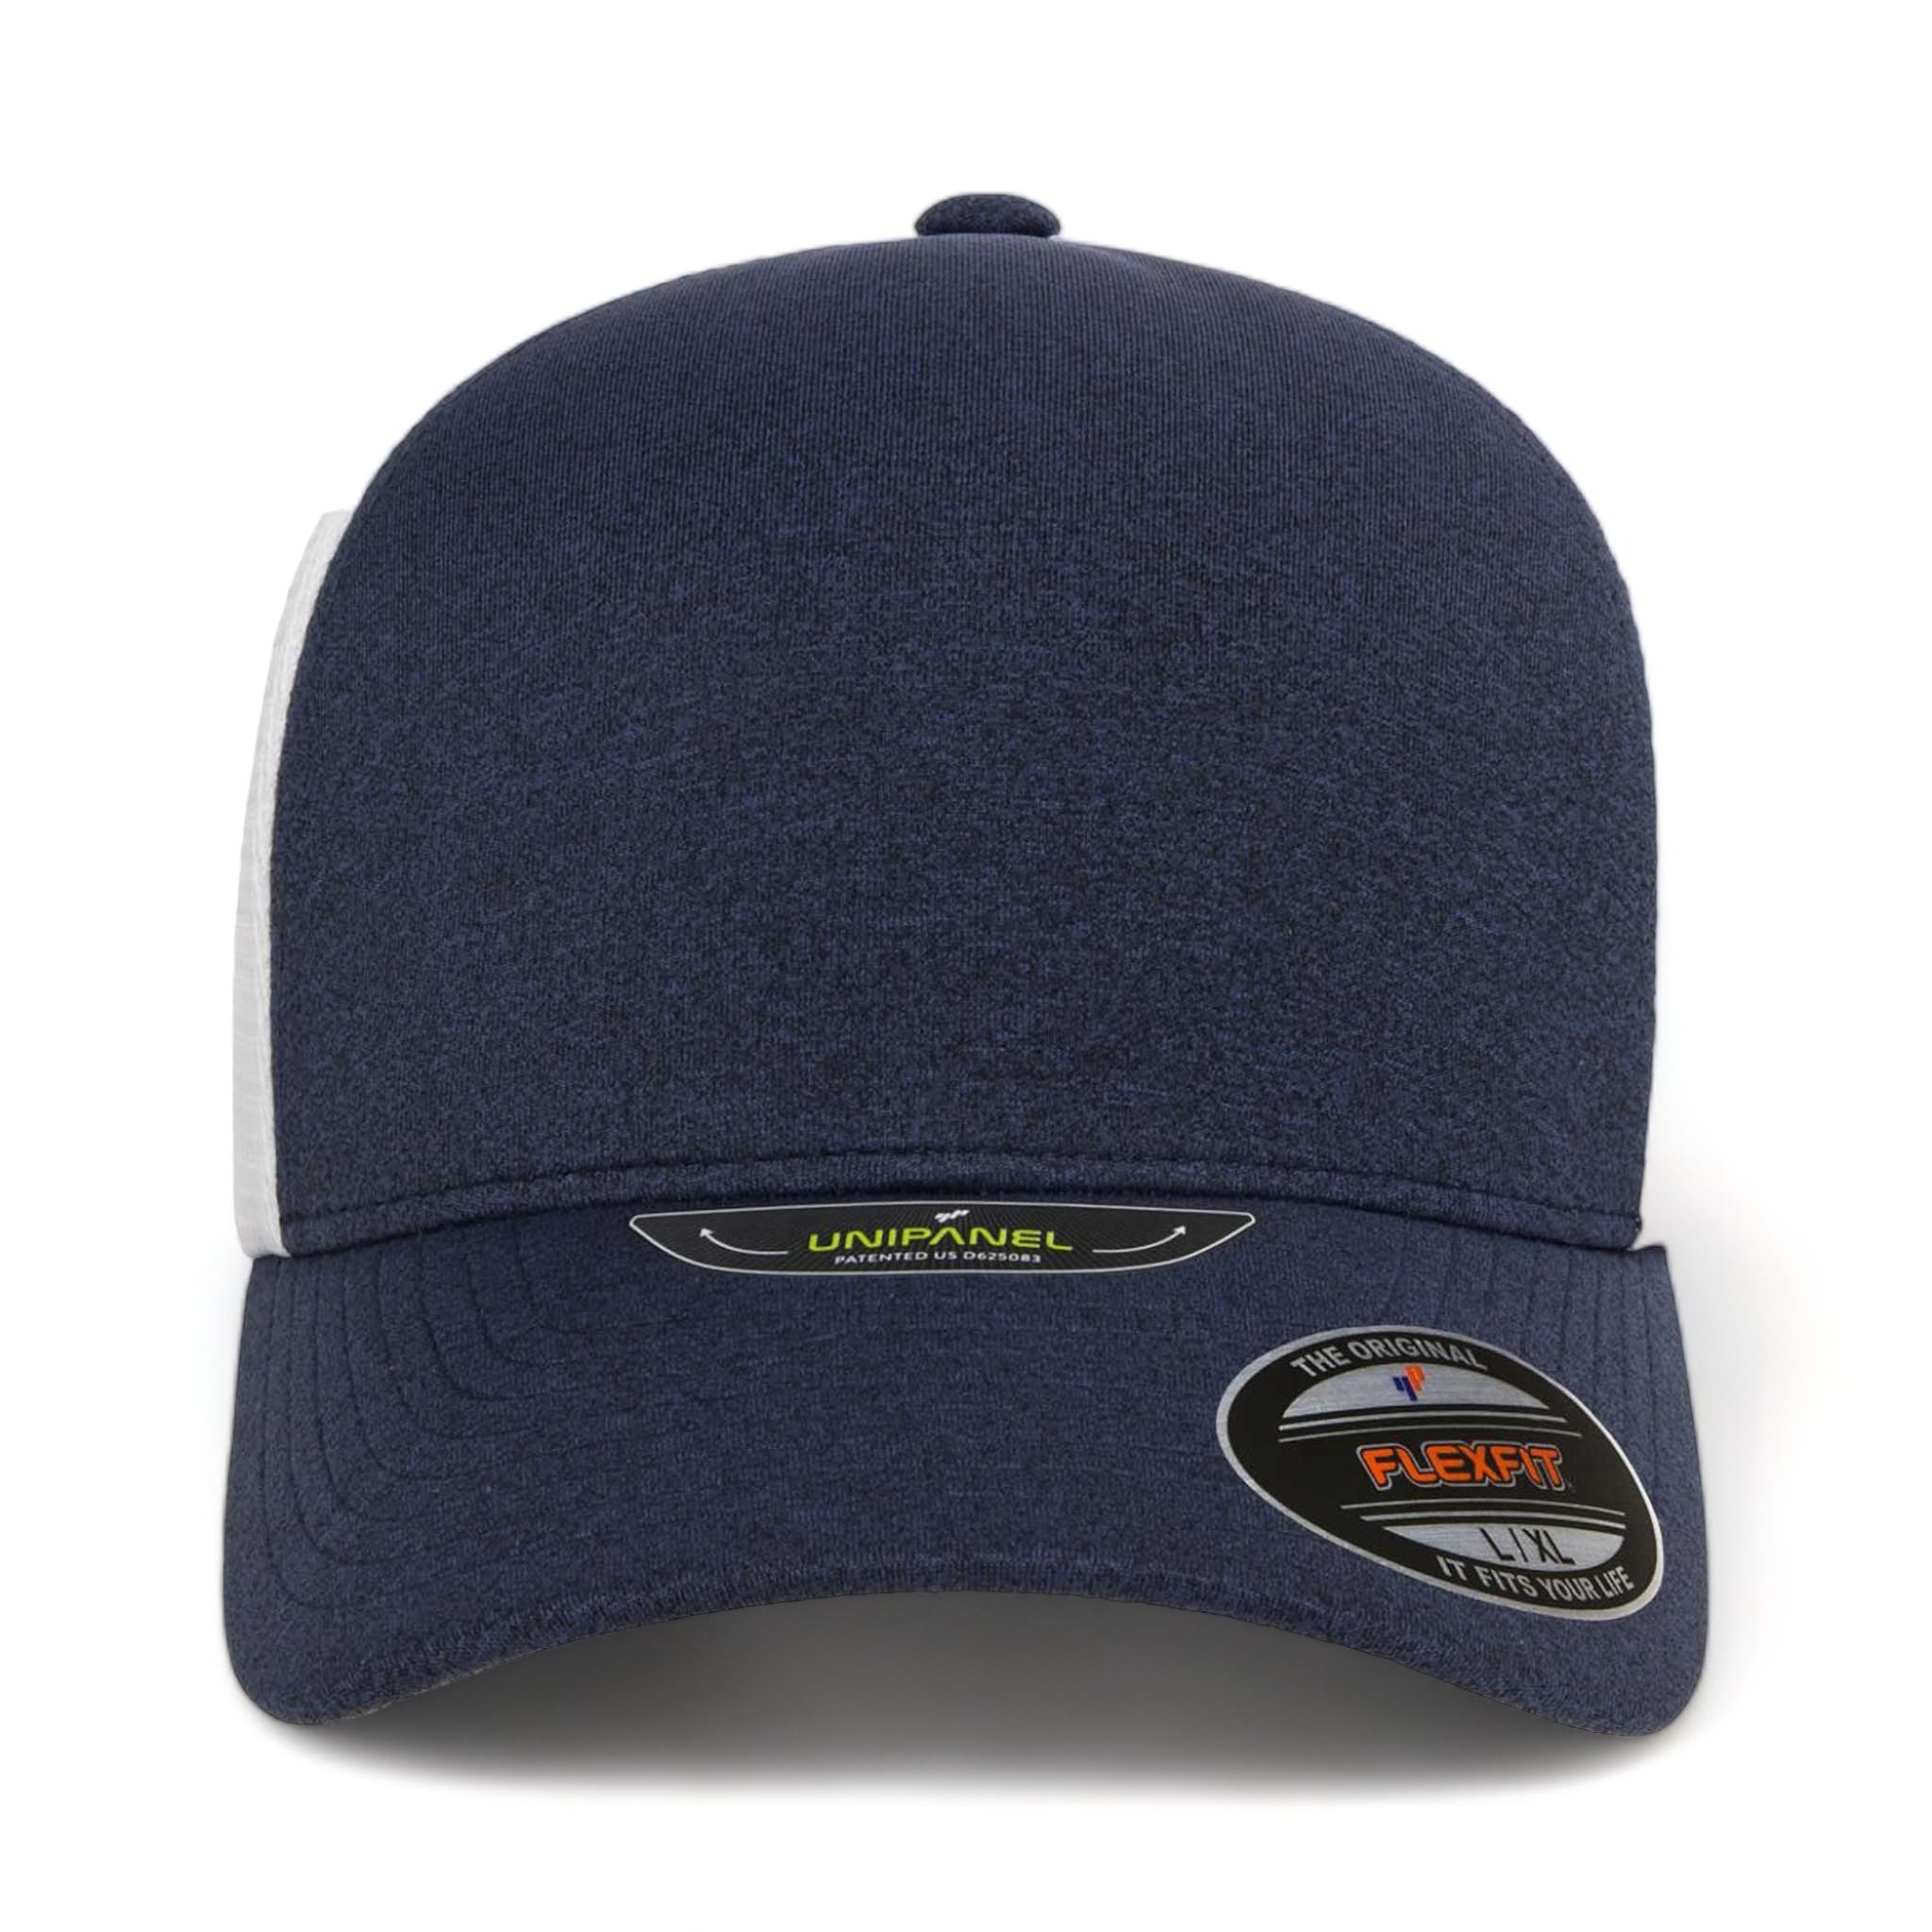 Front view of Flexfit 5511UP custom hat in mélange navy and white